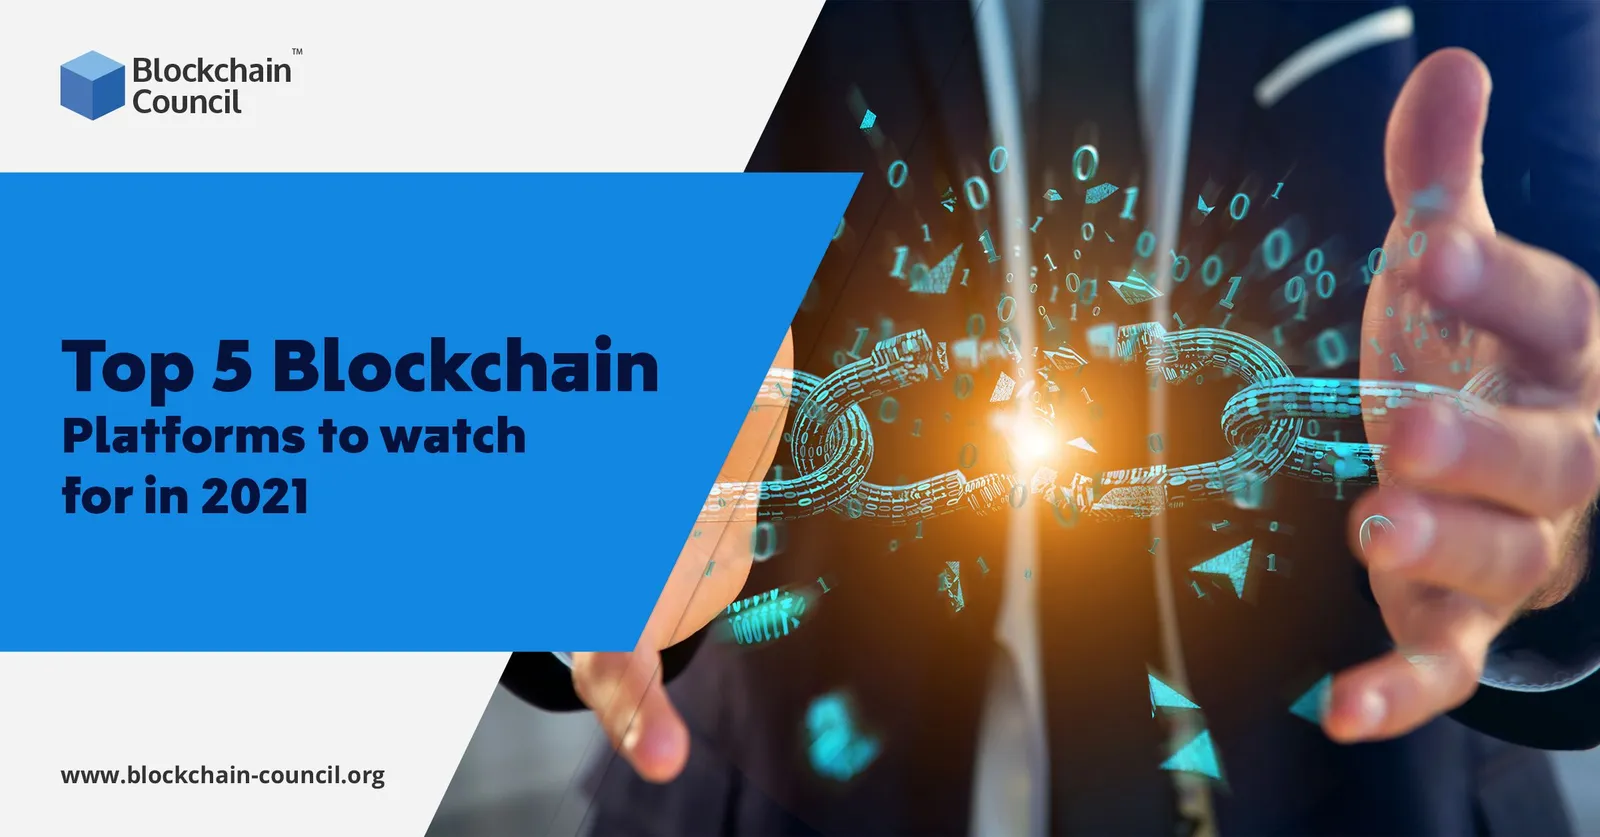 Top 5 Blockchain Platforms to watch for in 2021